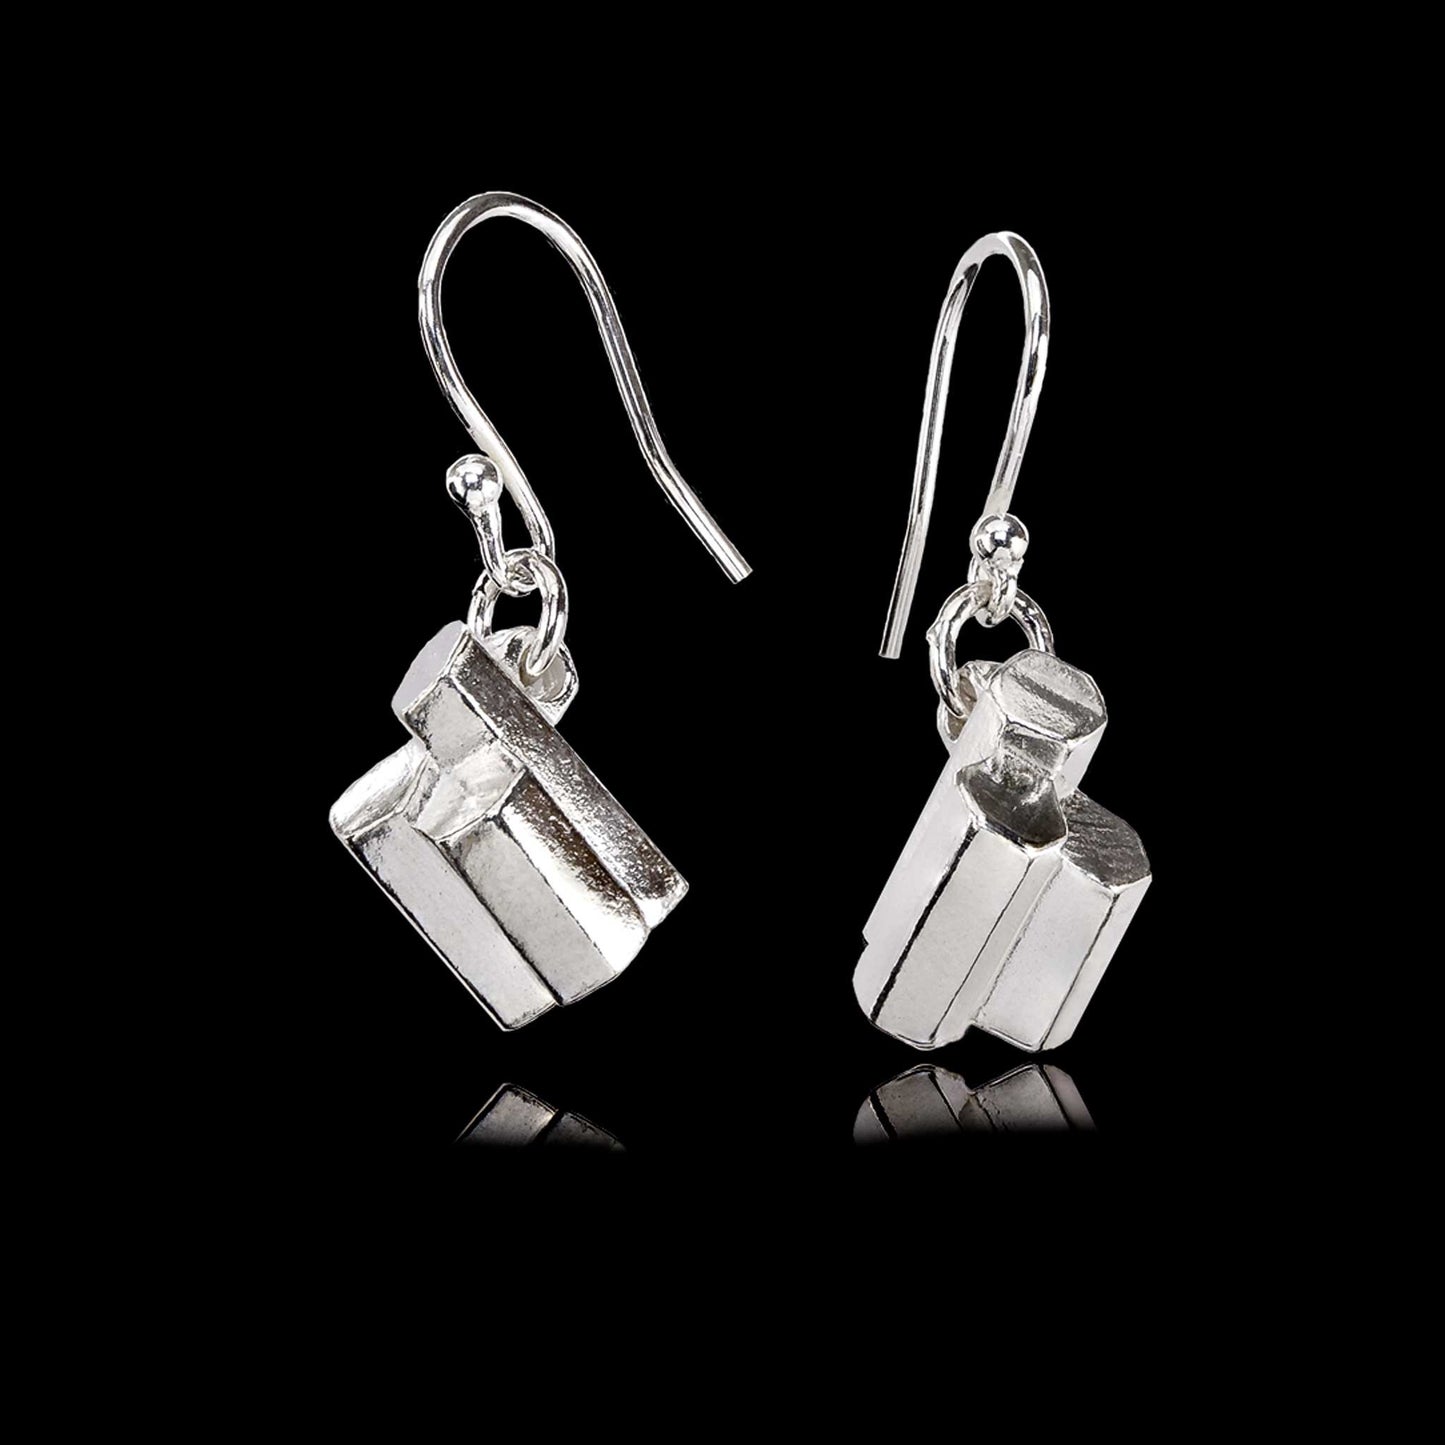 Giant's Causeway Silver Drop Earrings, hallmarked and gift boxed with worldwide postage available.